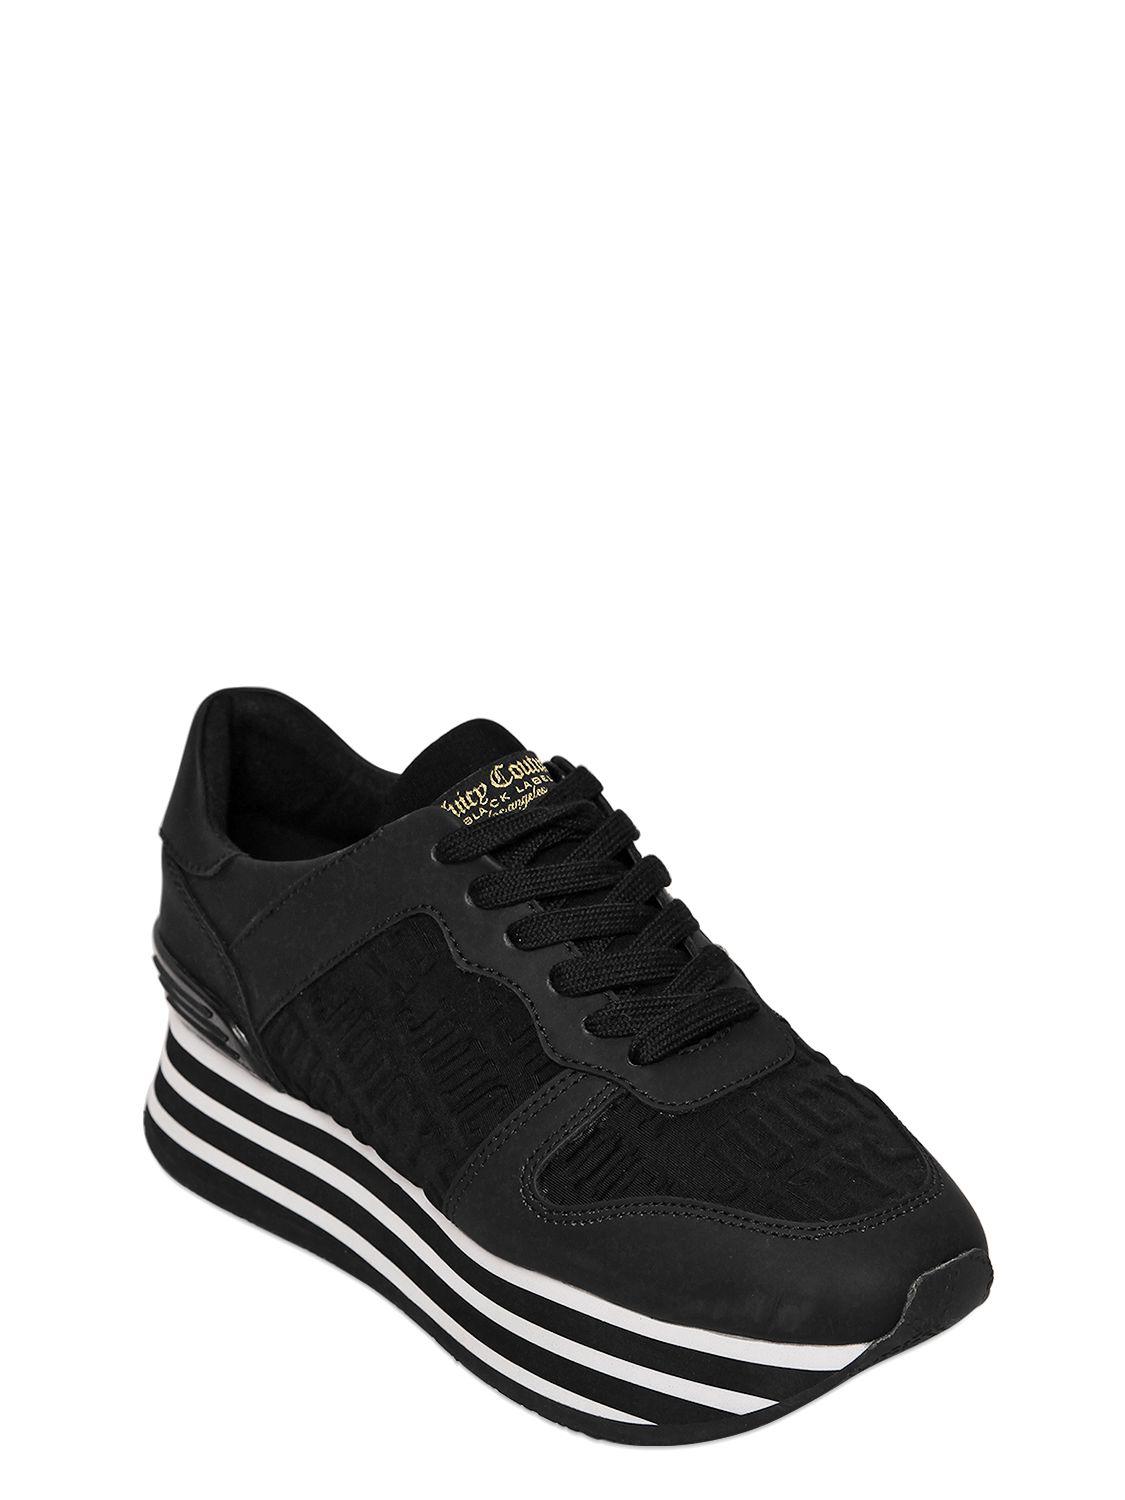 juicy couture black label trainers